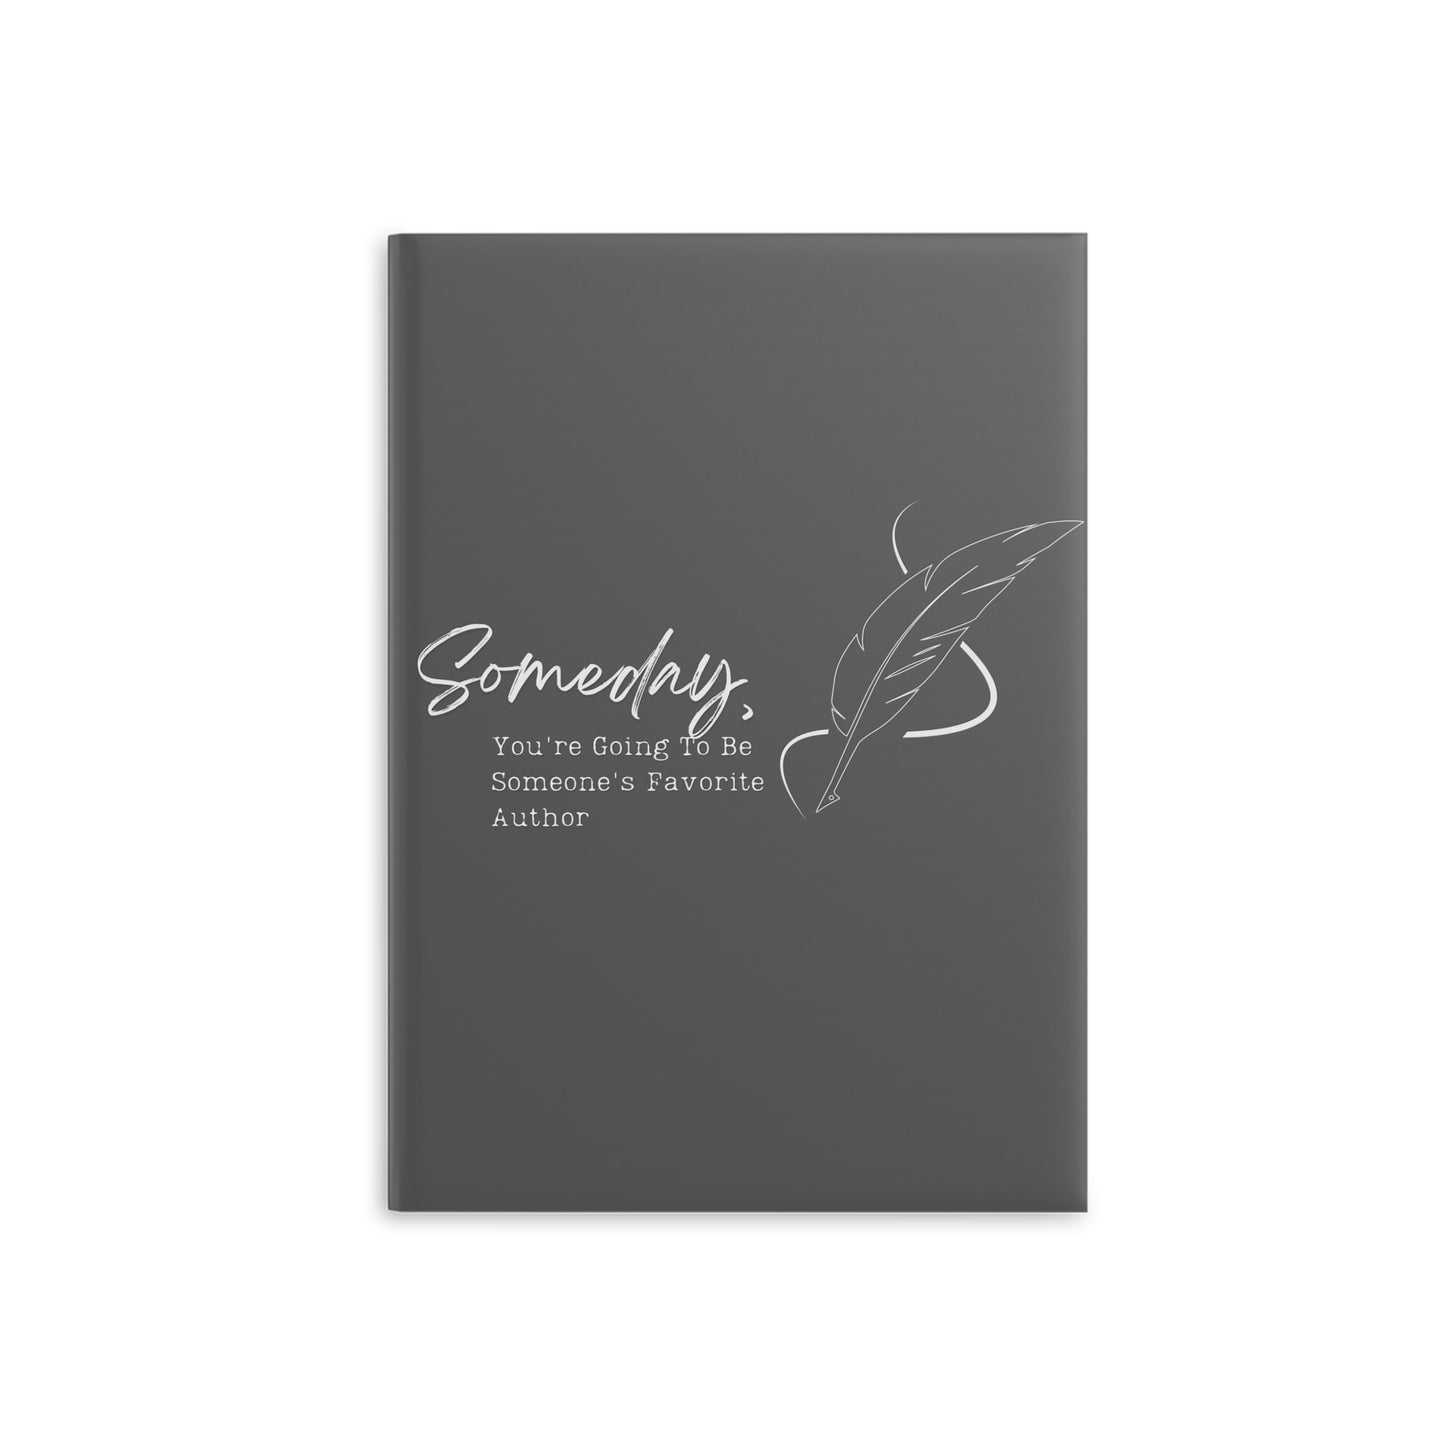 Someday, you're going to be someone's favorite author // Write Out Loud // Hardcover Notebook with Puffy Covers (Gray)